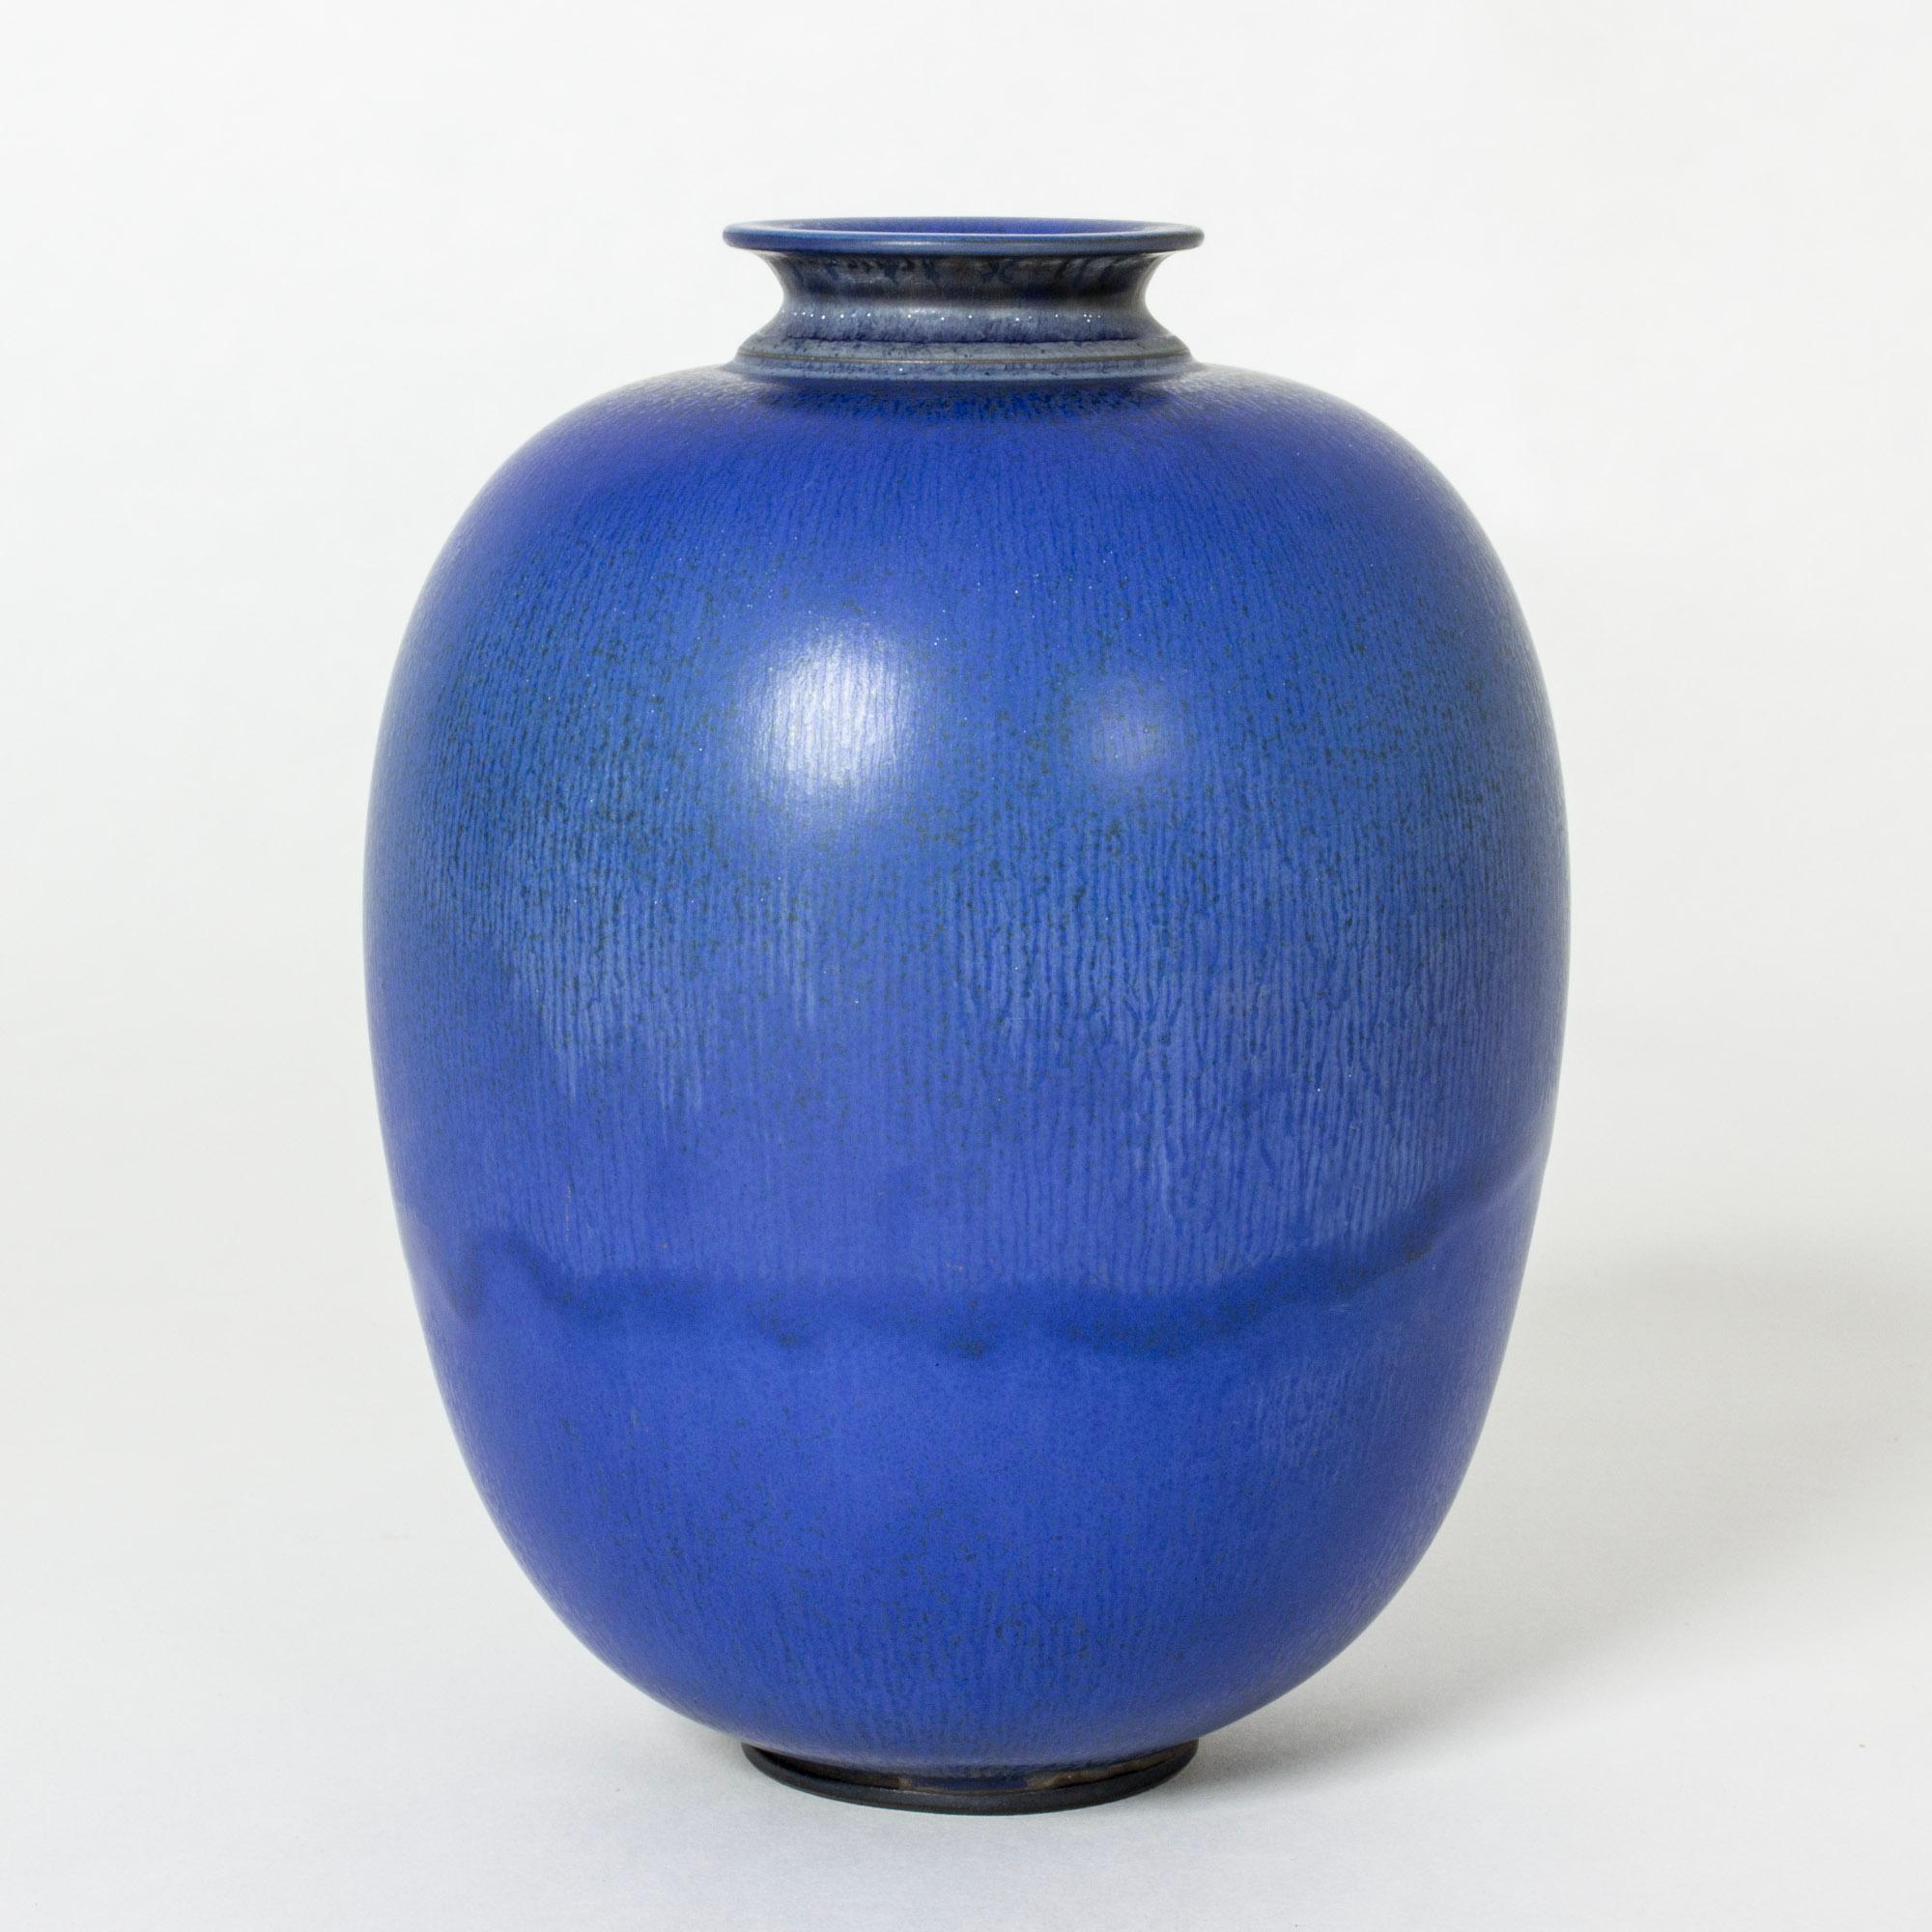 Beautiful stoneware vase by Berndt Friberg, in an oval, plump form. Vibrant blue hare’s fur glaze, paler on the top half of the body.

Berndt Friberg was a Swedish ceramicist, renowned for his stoneware vases and vessels for Gustavsberg. His pure,